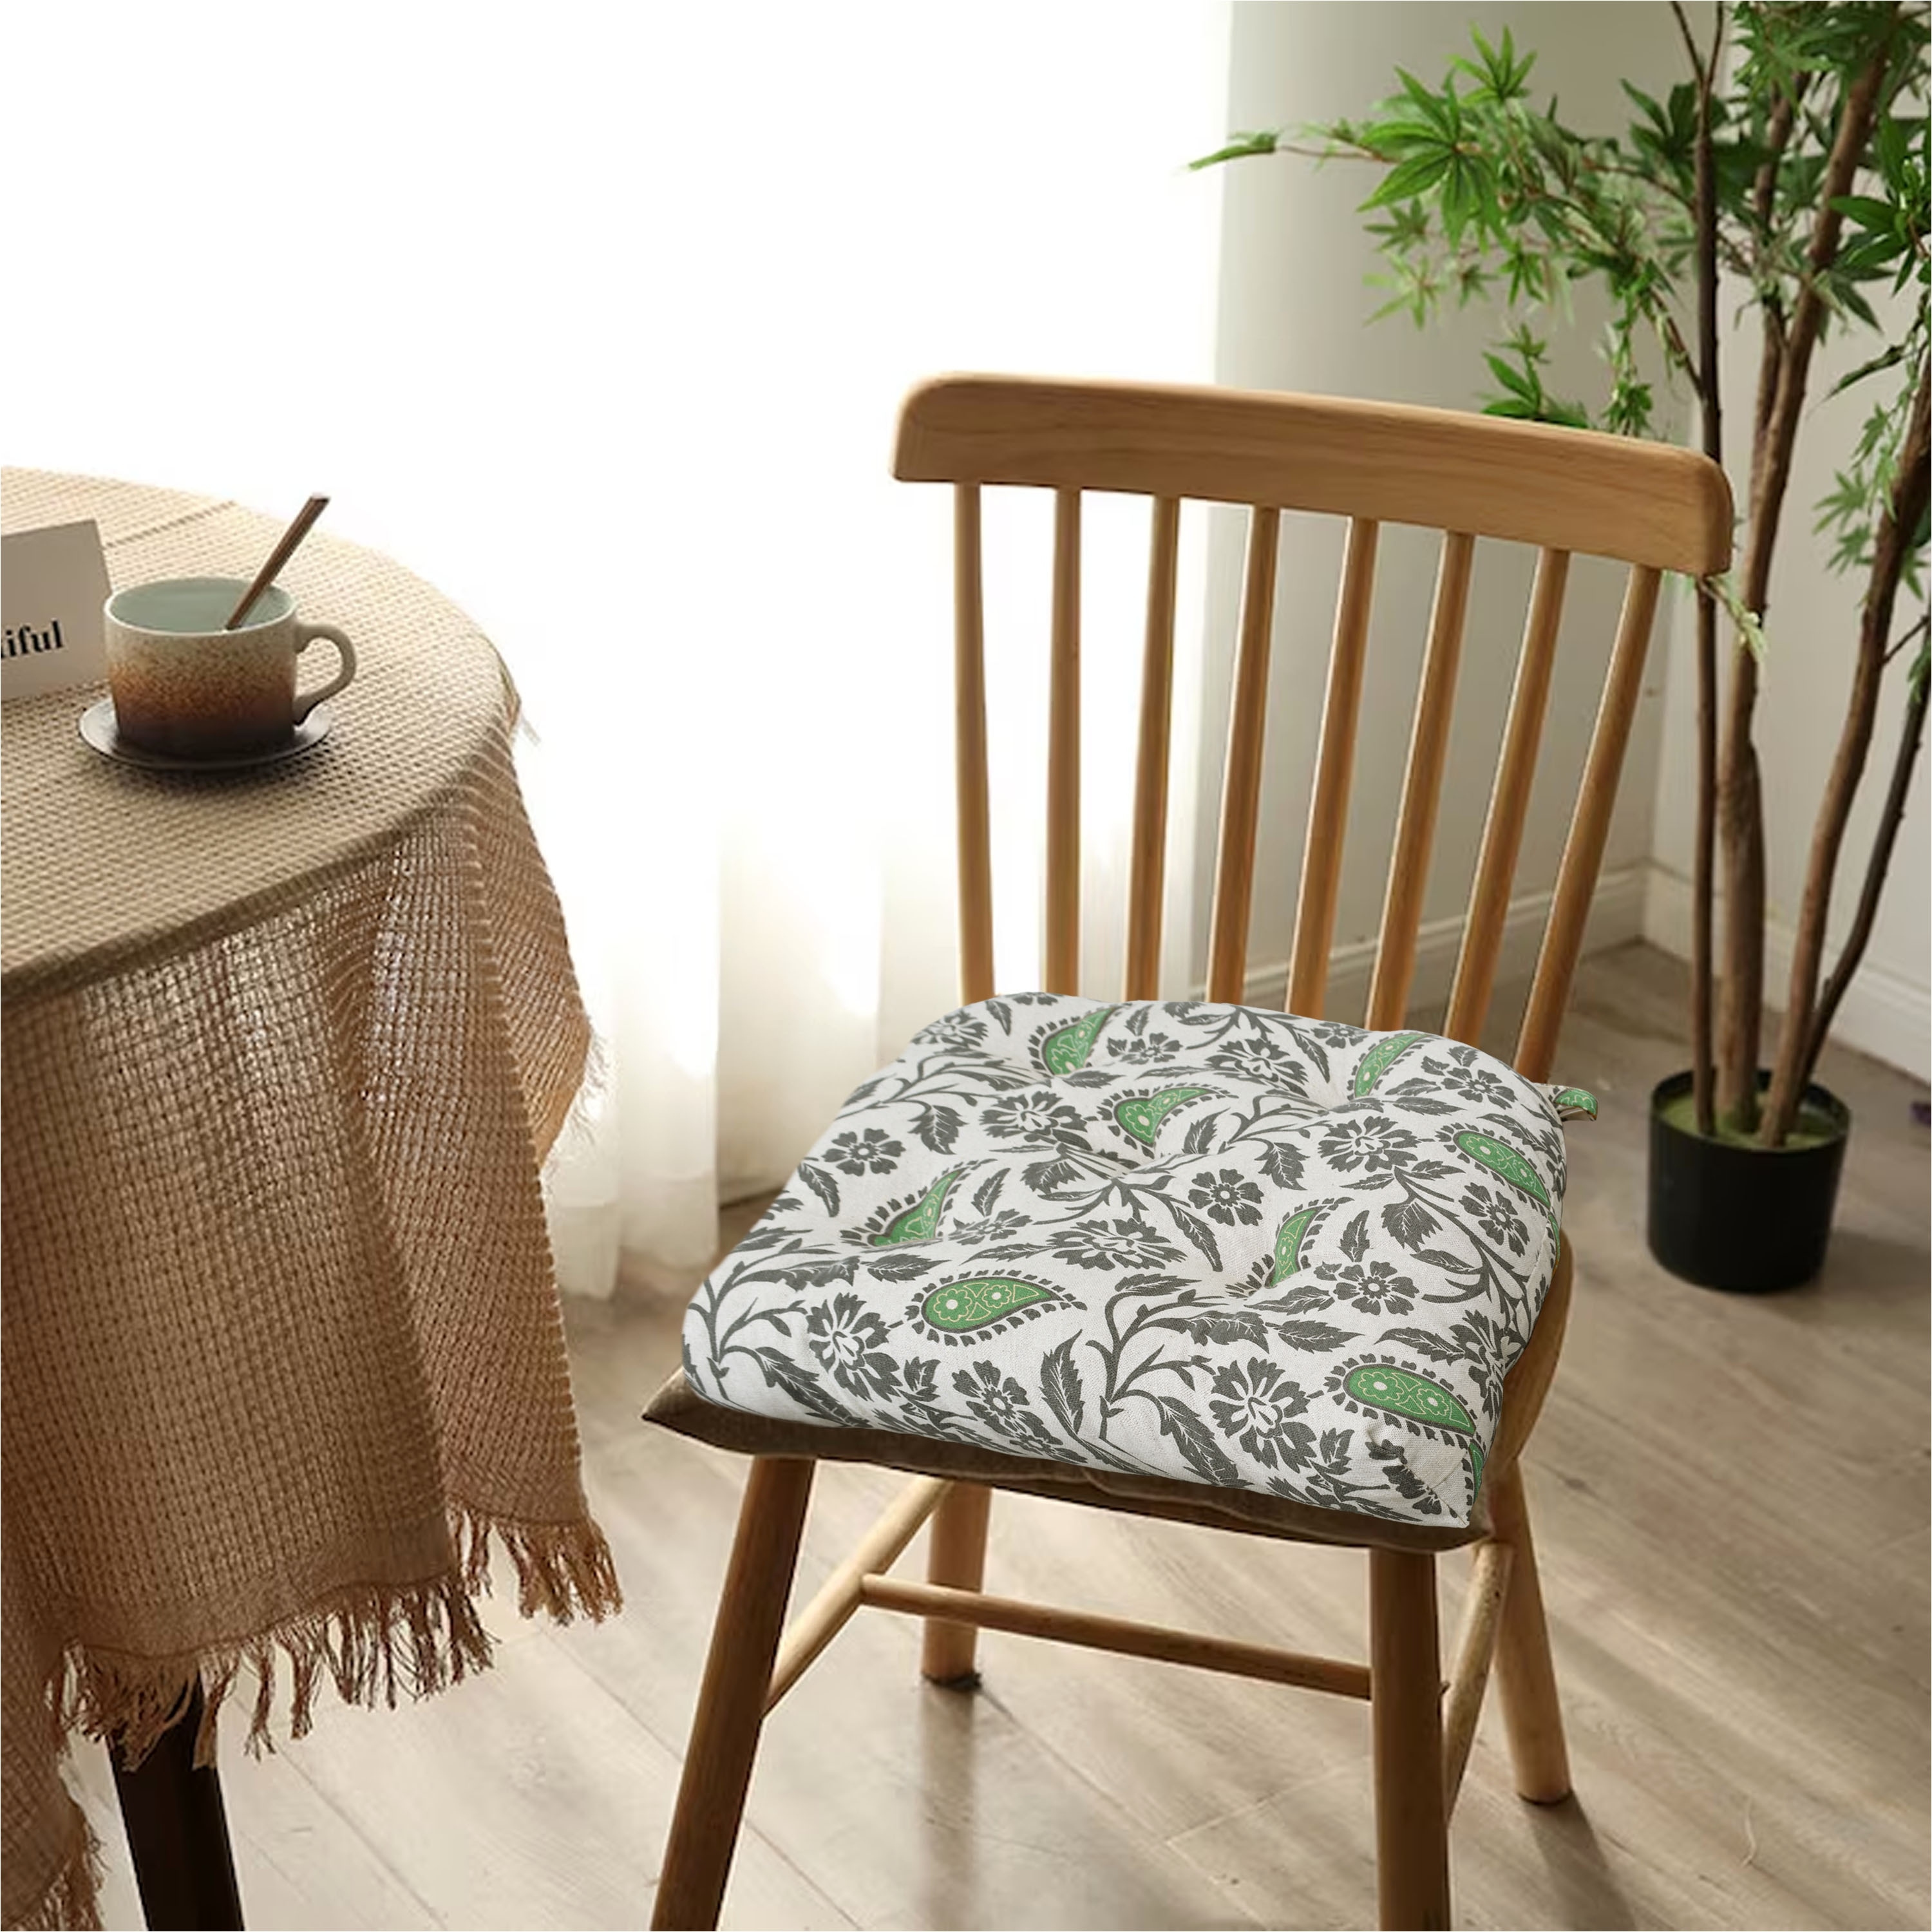 Handmade Cotton Chair Seat Pads Cushions - Comfortable Pad with